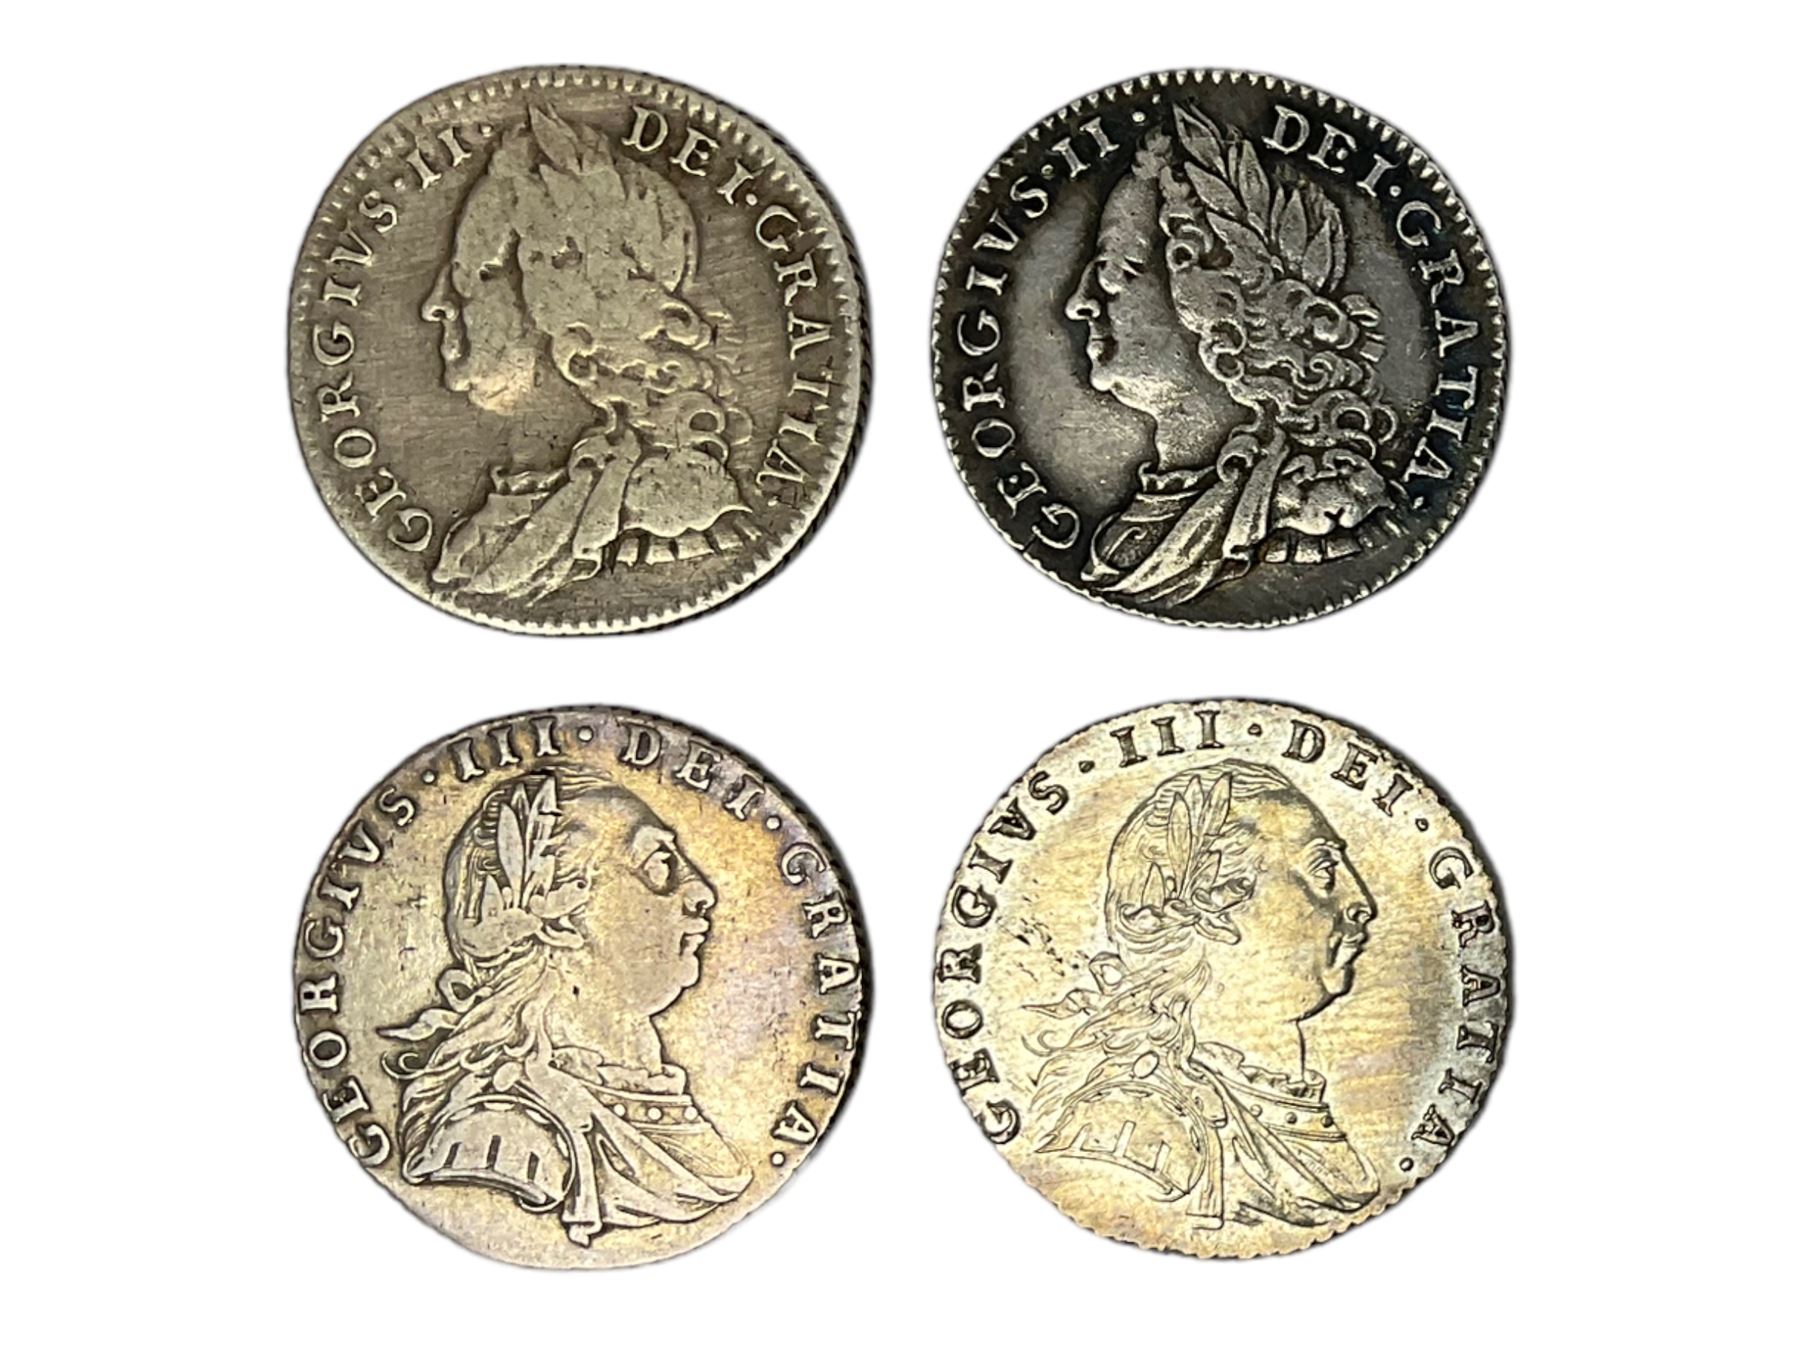 Two George II 1758 silver sixpence coins and two George III 1787 silver sixpences (4)